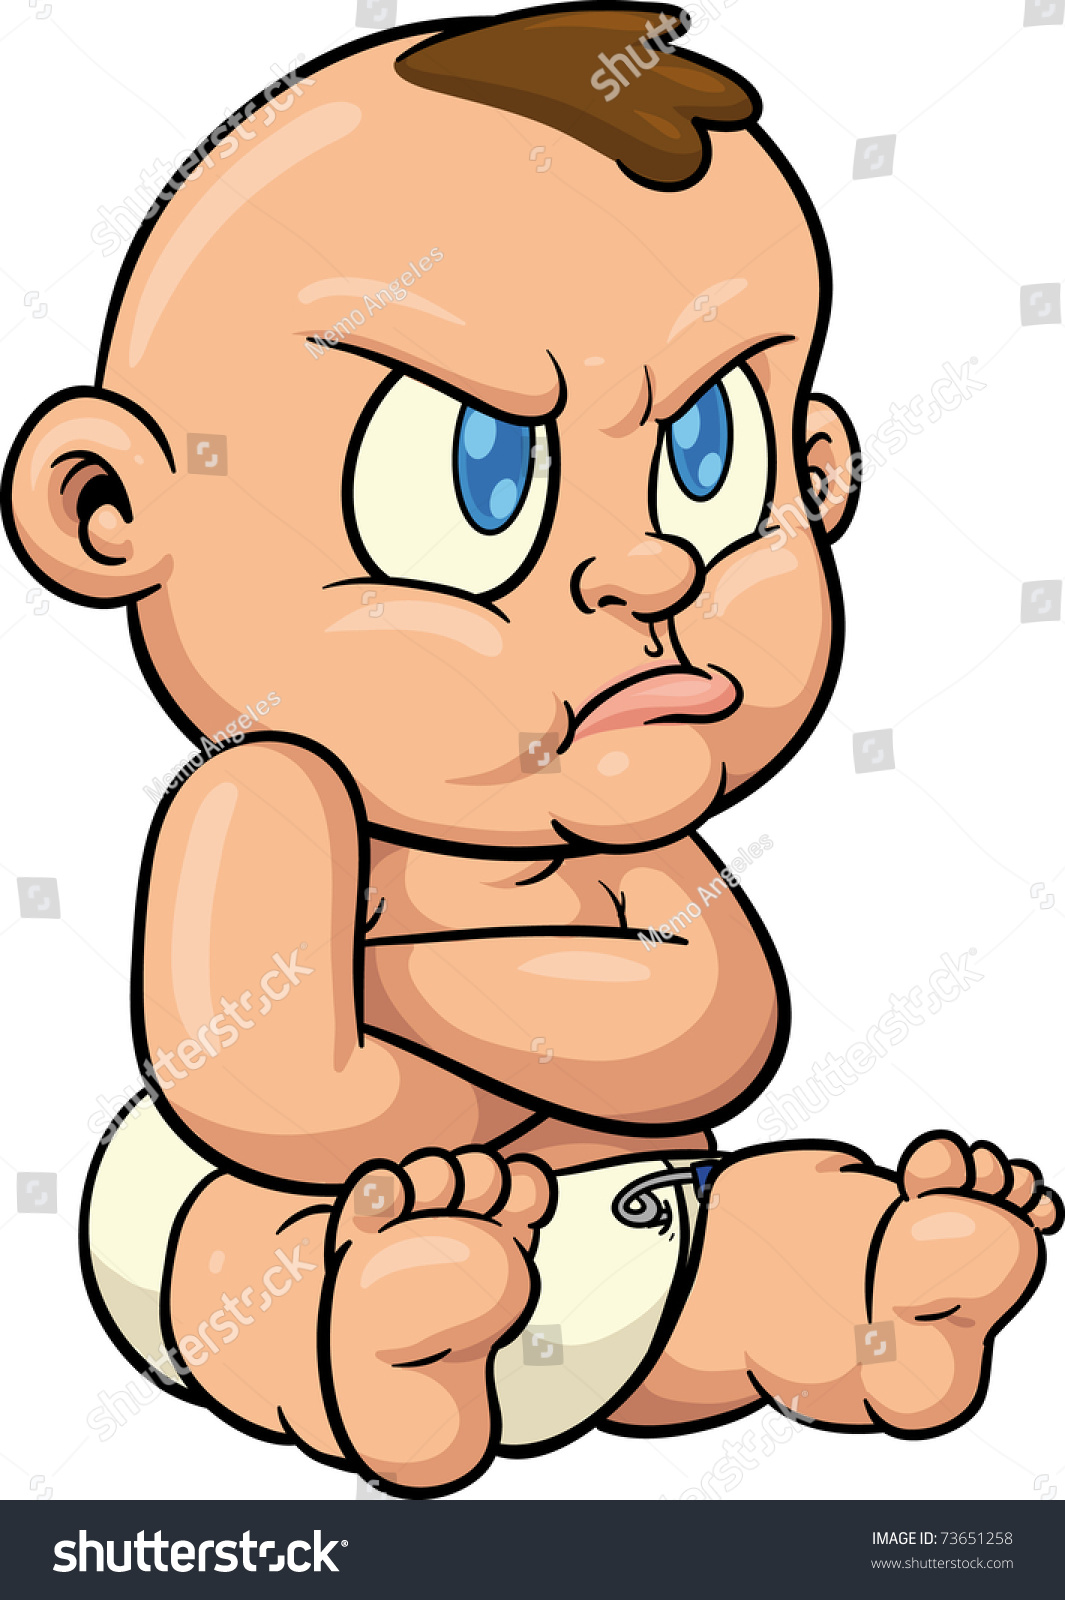 clipart pouting baby - photo #2